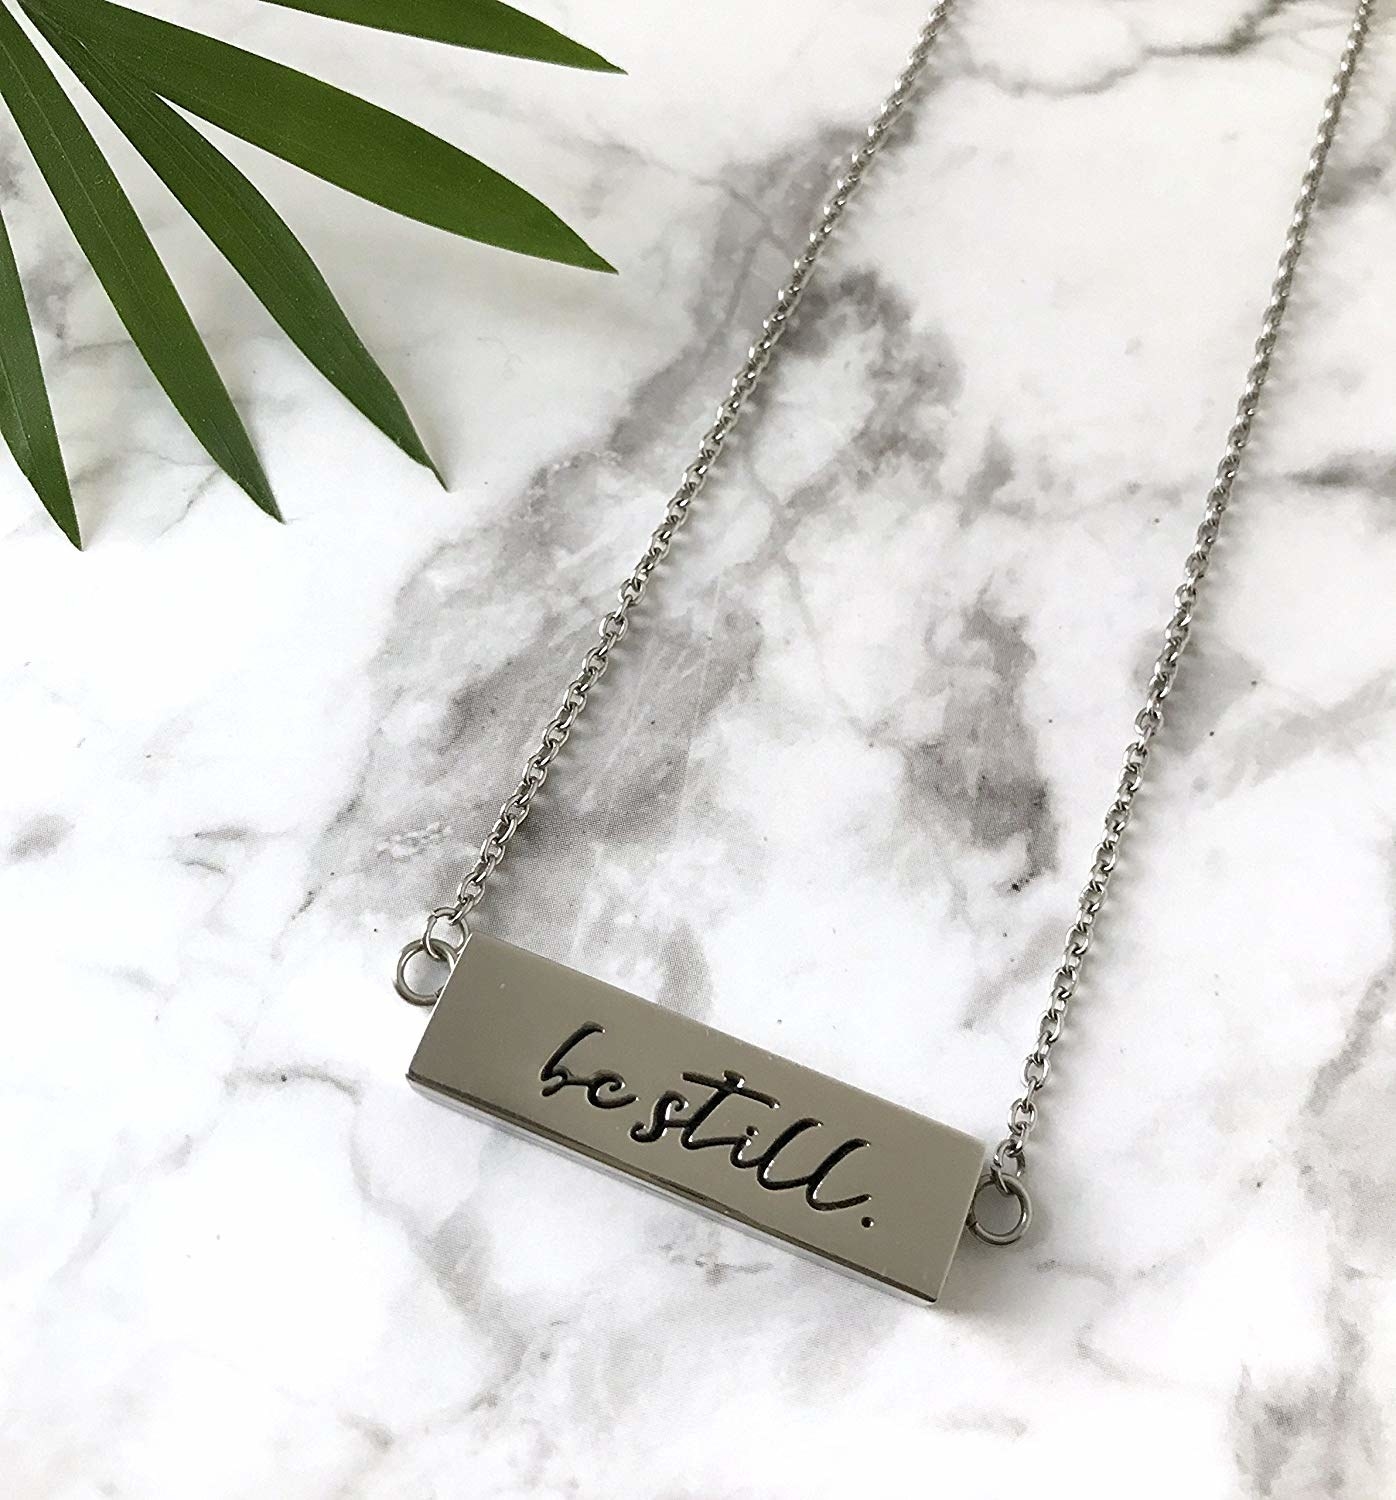 necklace that says &quot;be still&quot; and has a spot to stash a diffuser pad